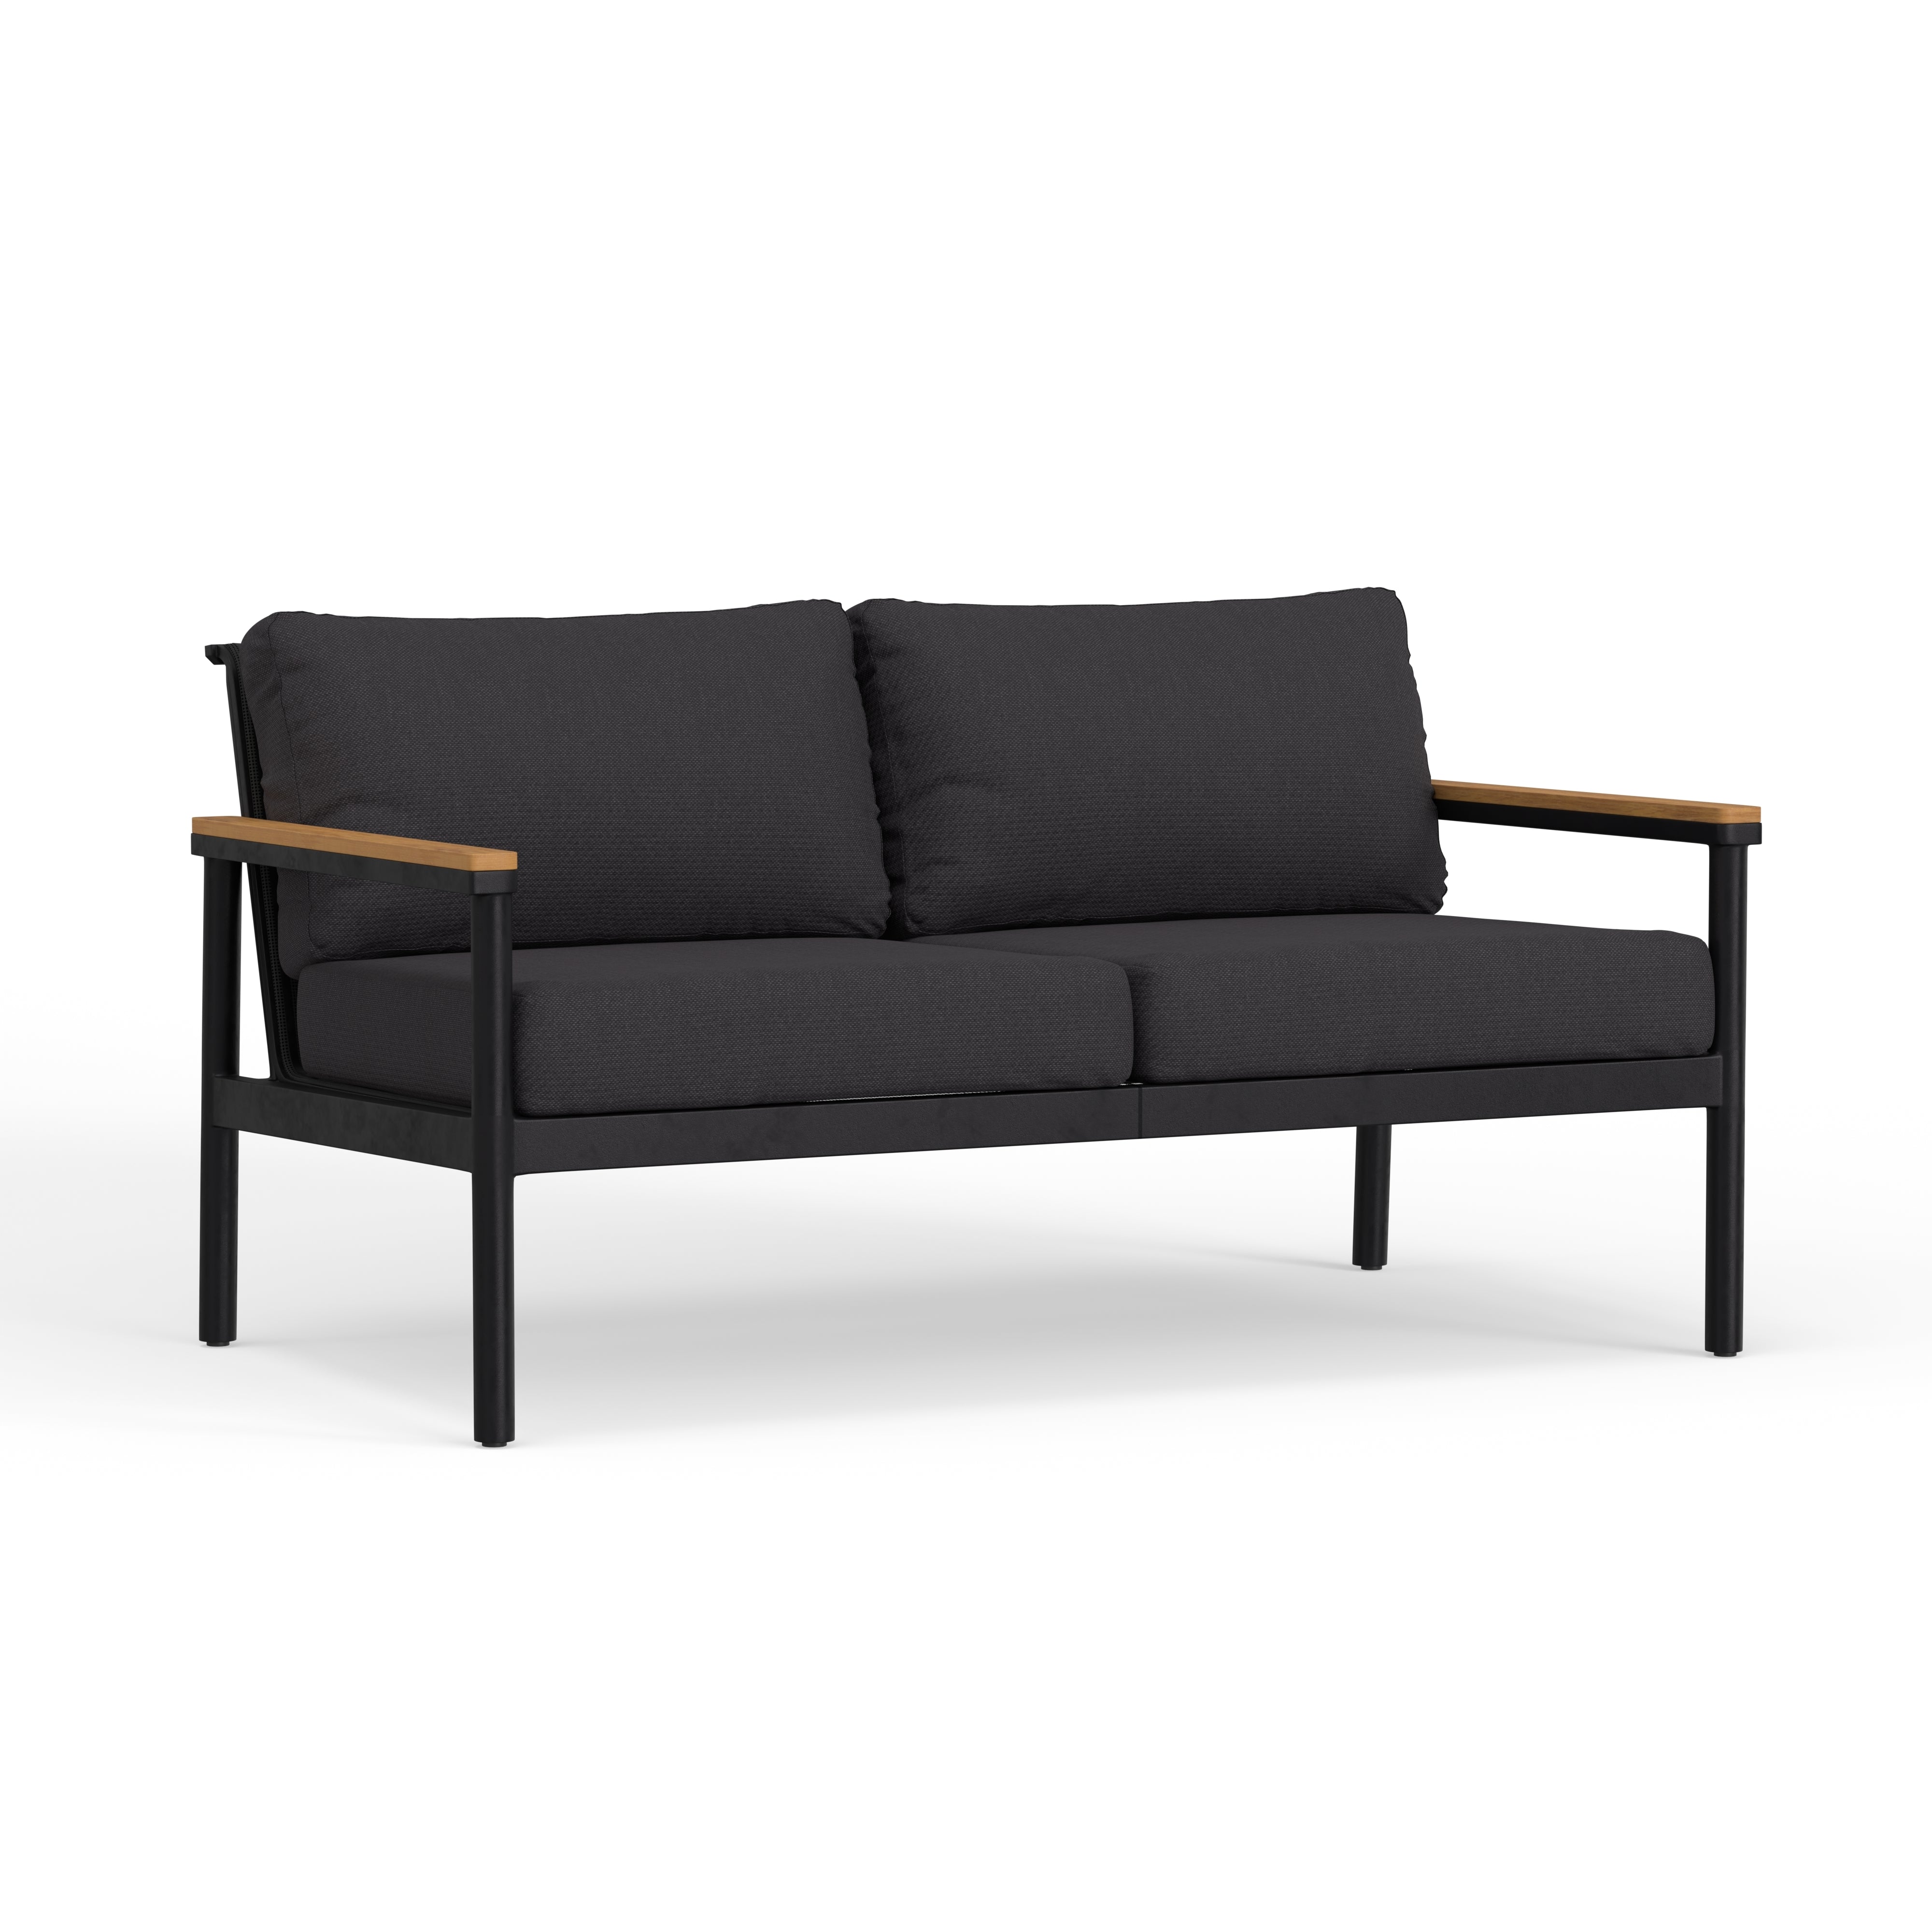 Modern Black Aluminum Seating Set For Outdoors With Cushions